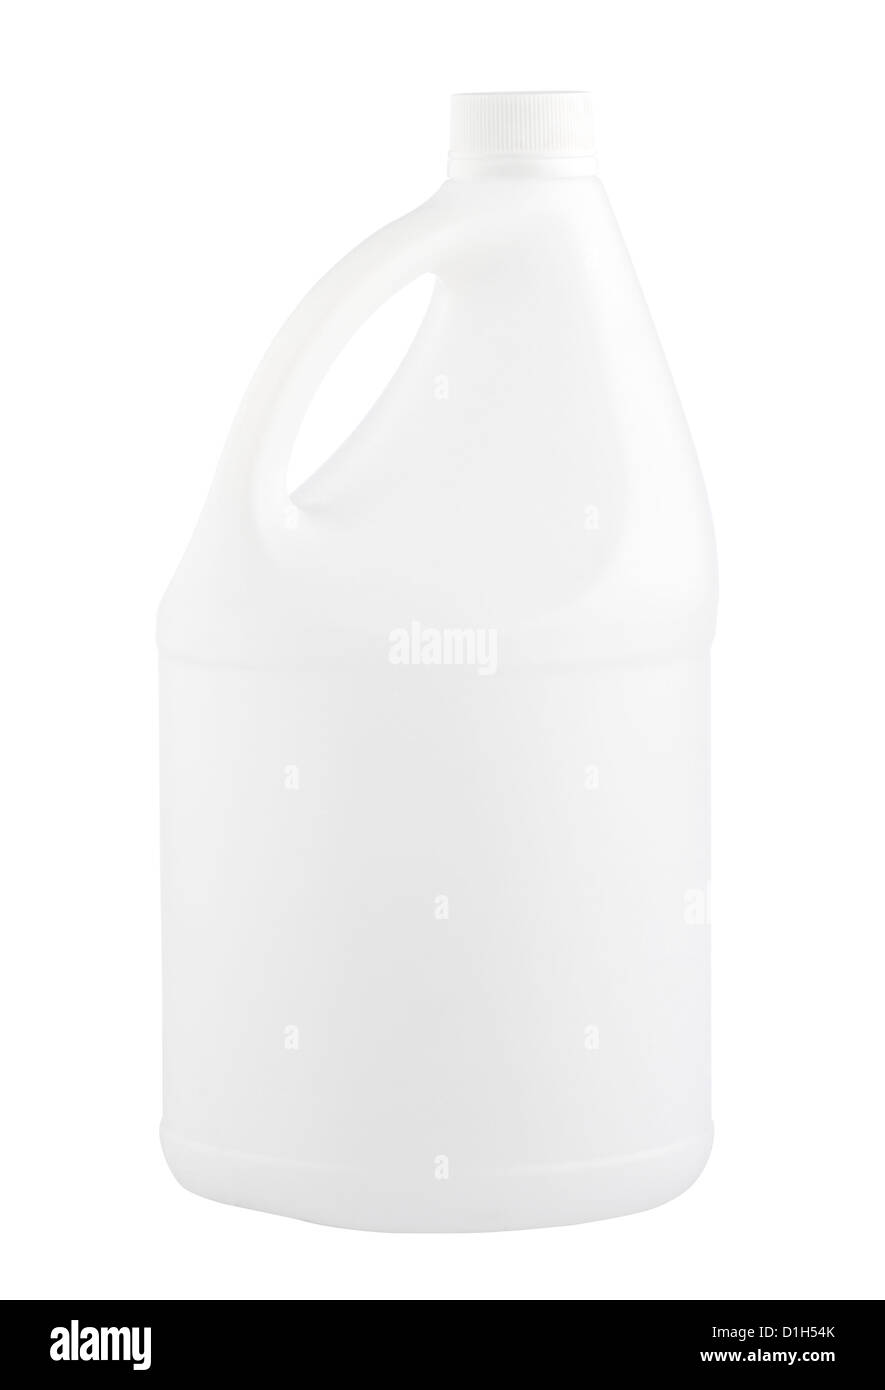 Milk or liquid container with no sign or logo Stock Photo